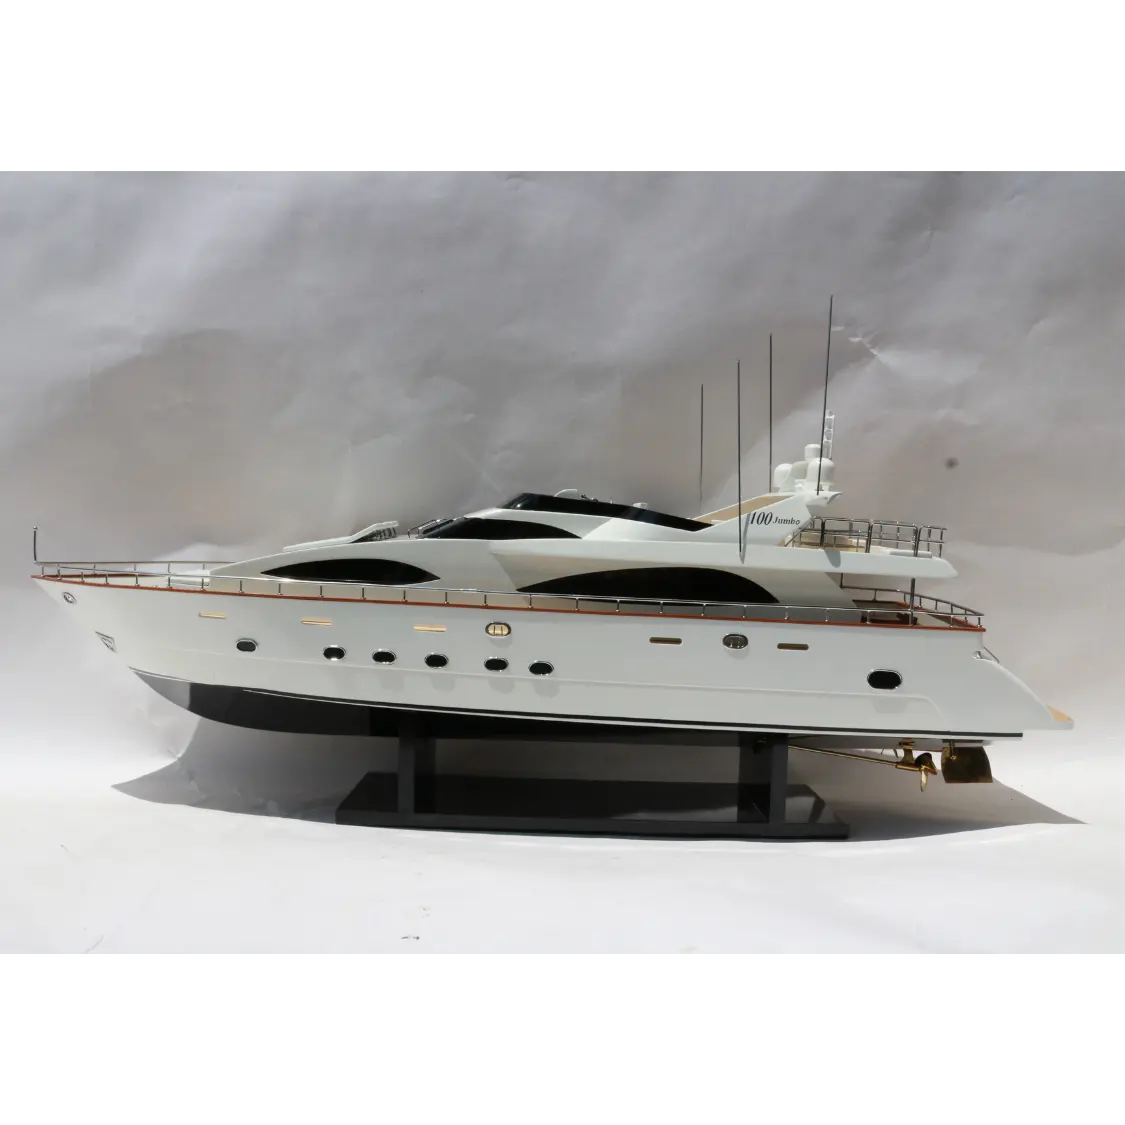 AZIMUT JUMBO 100 WOODEN DISPLAY MODERN YACHT - HANDMADE WOODEN MODEL BOAT FOR DECORATION - HIGH QUALITY SPEED BOAT MODEL